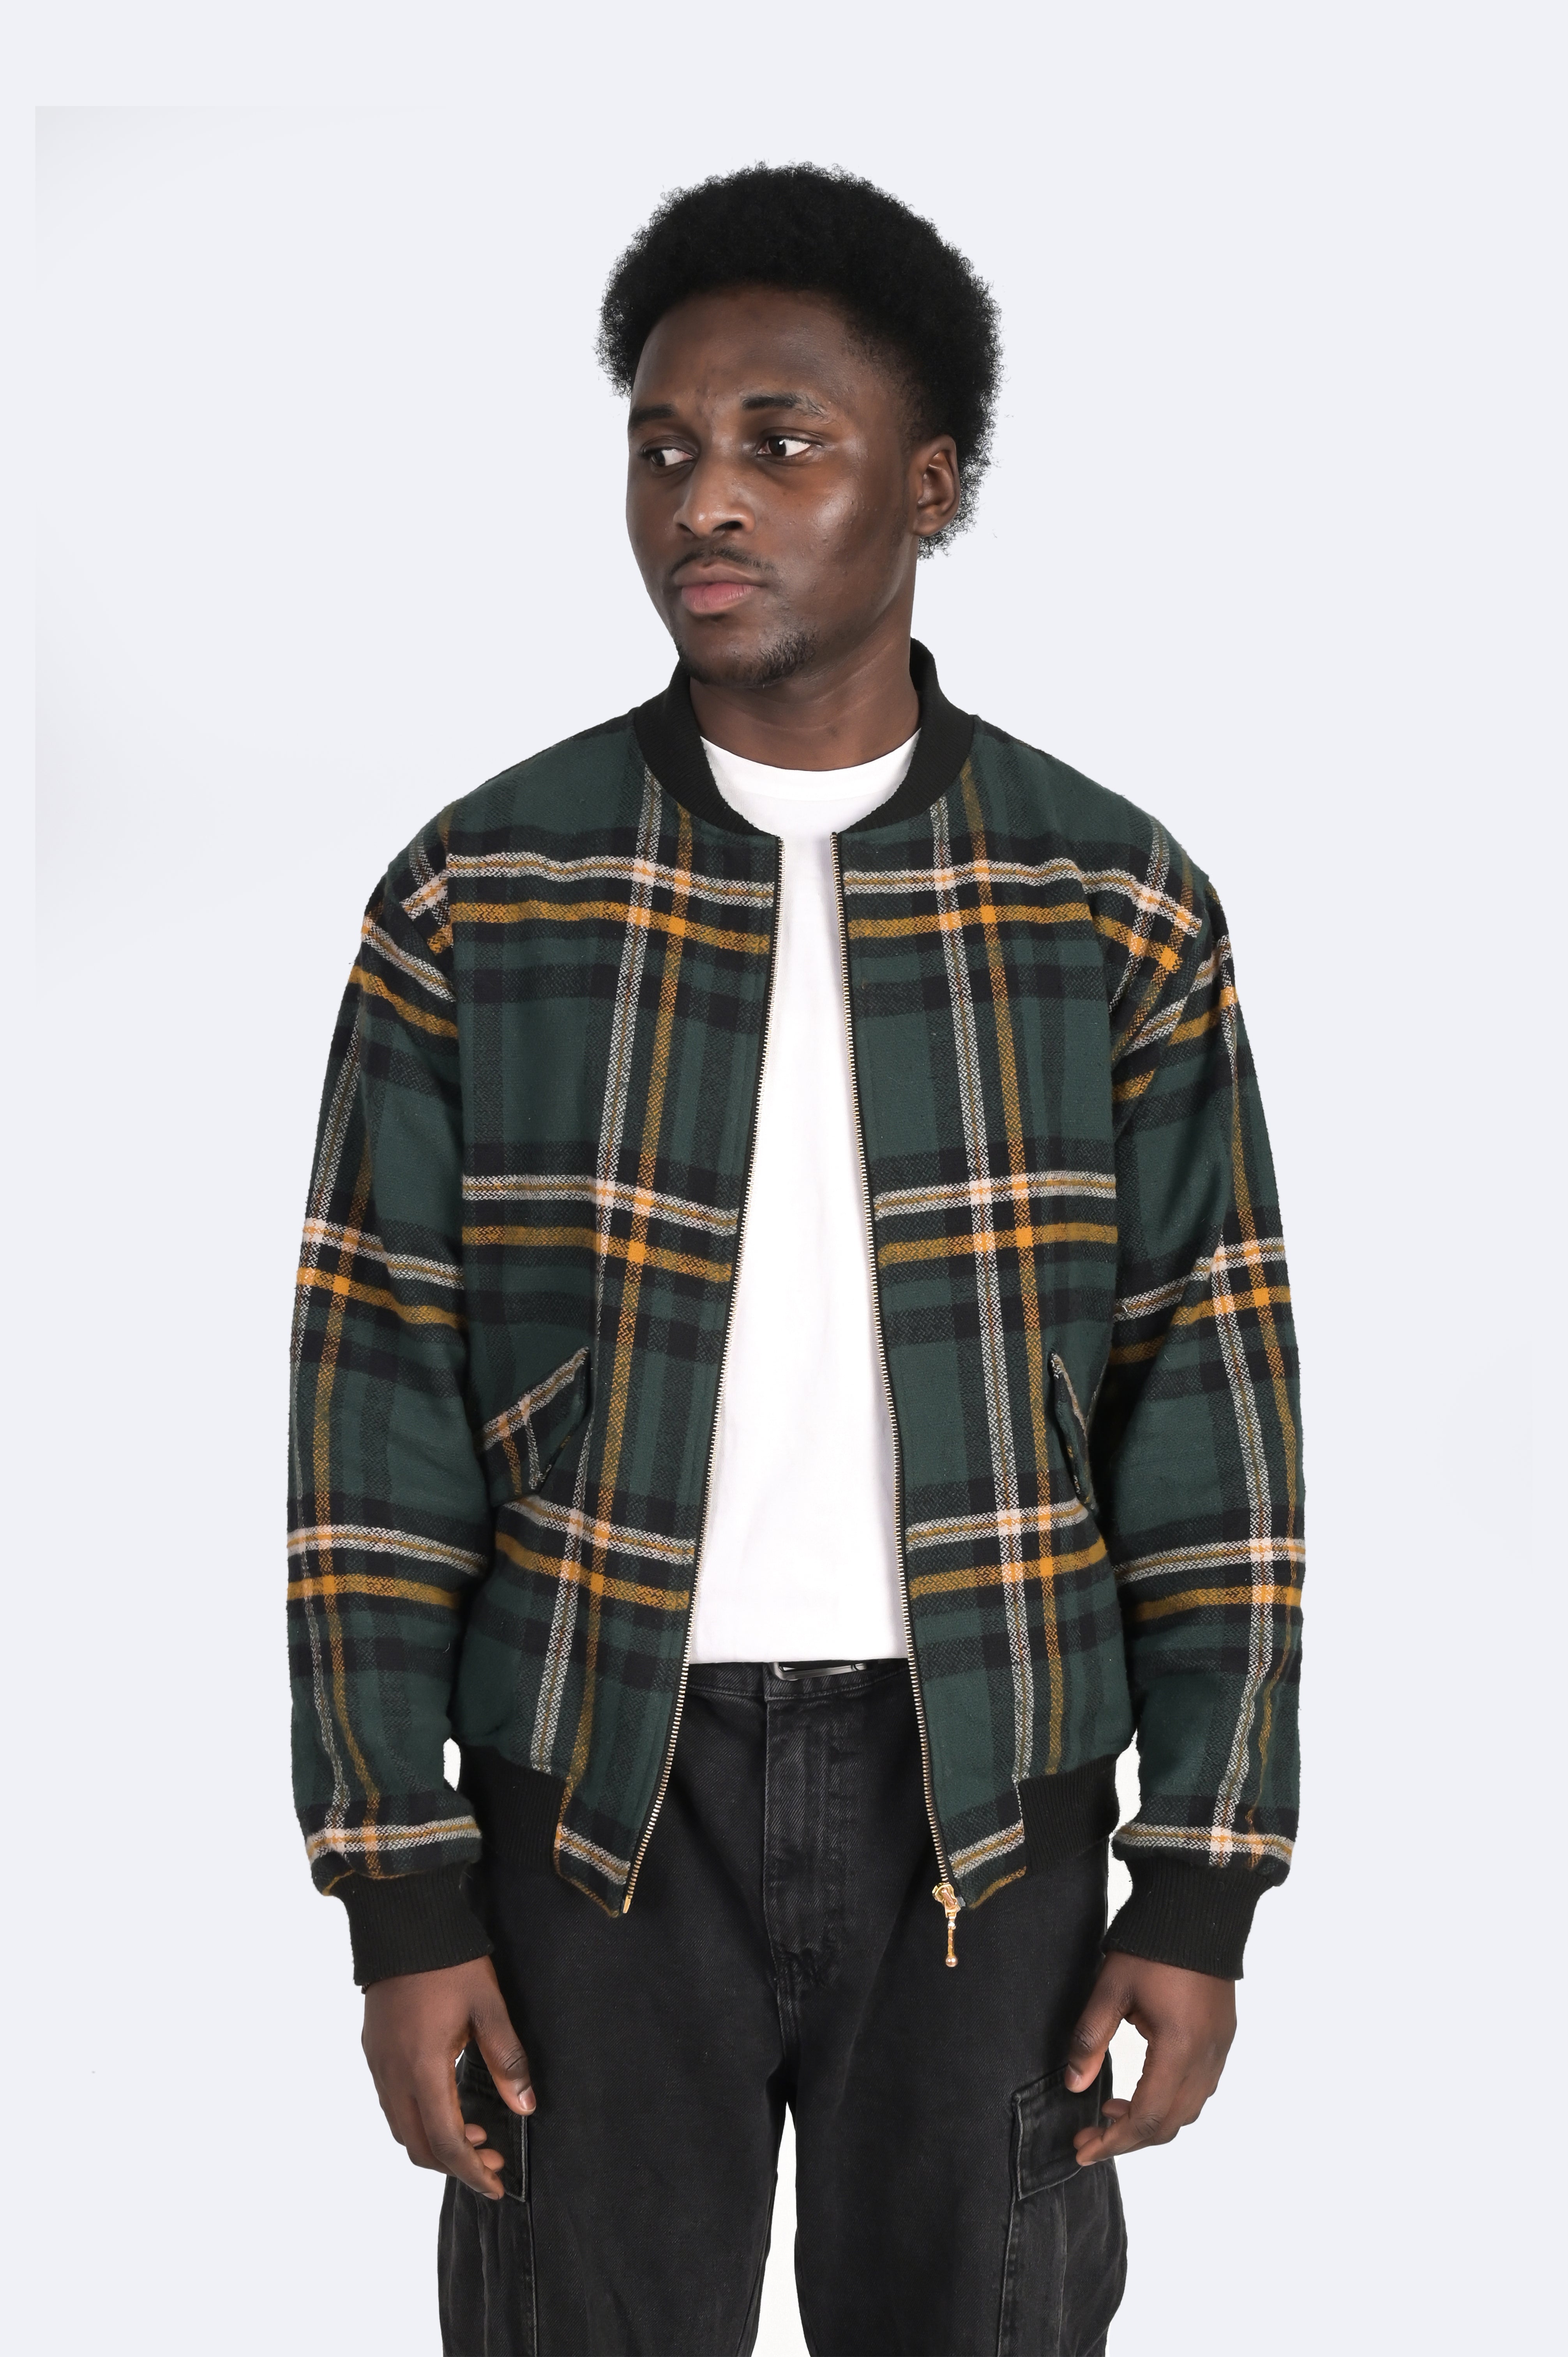 Stylish Slim Fit Mens Bomber Jacket With Pockets Cotton Coats For  Fashionable Streetwear And Mens Outerwear From Manteau, $41.49 | DHgate.Com